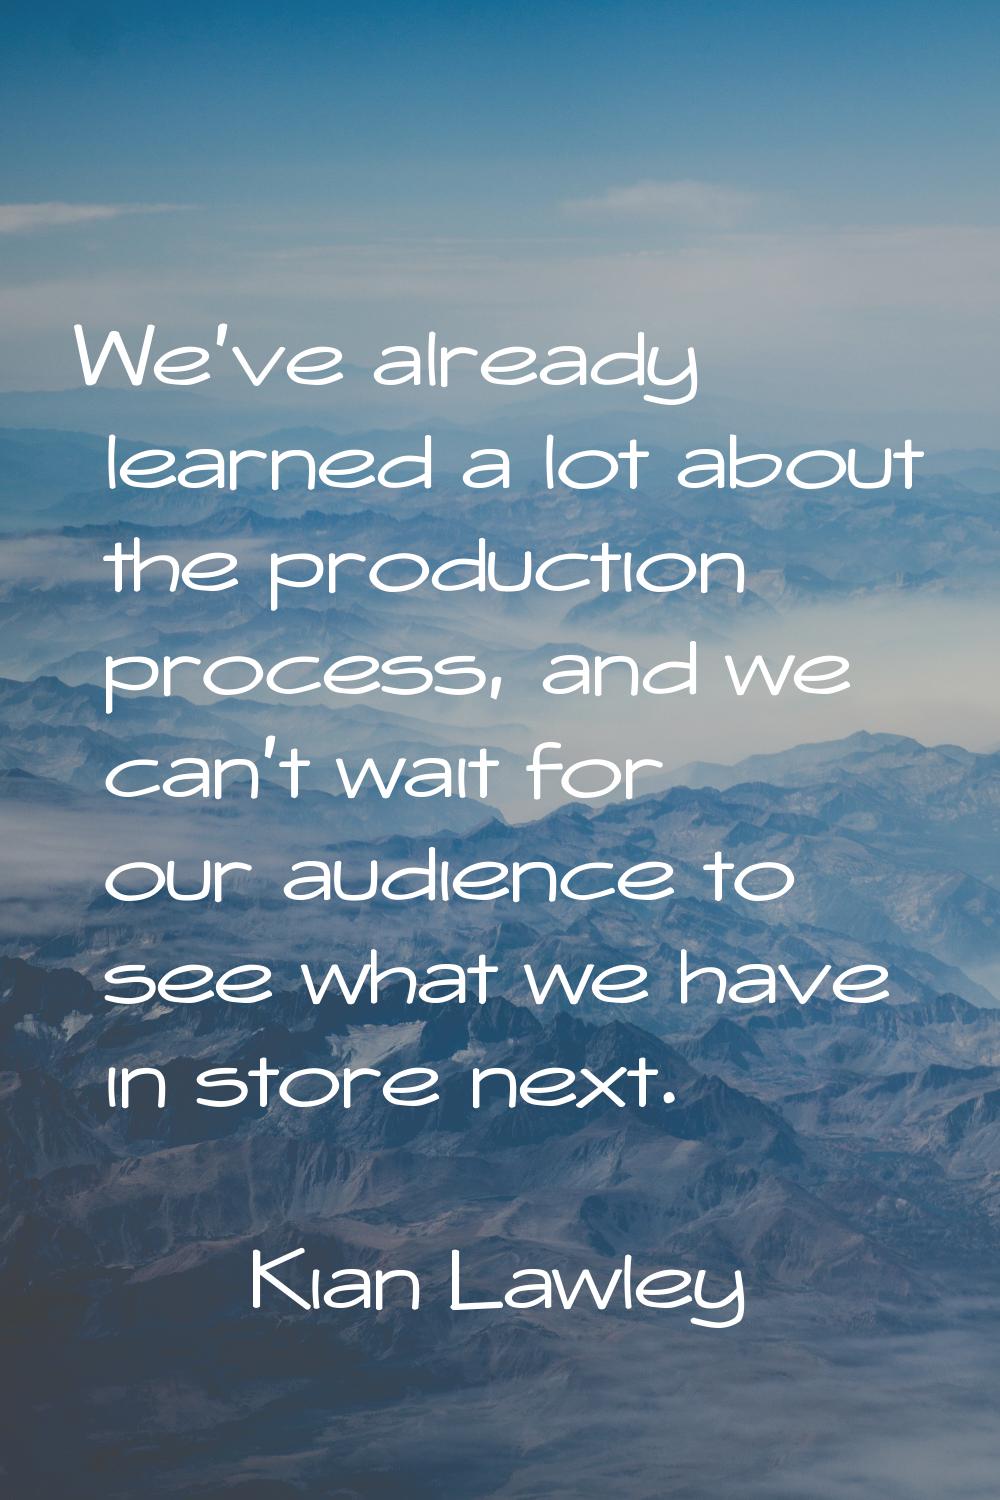 We've already learned a lot about the production process, and we can't wait for our audience to see